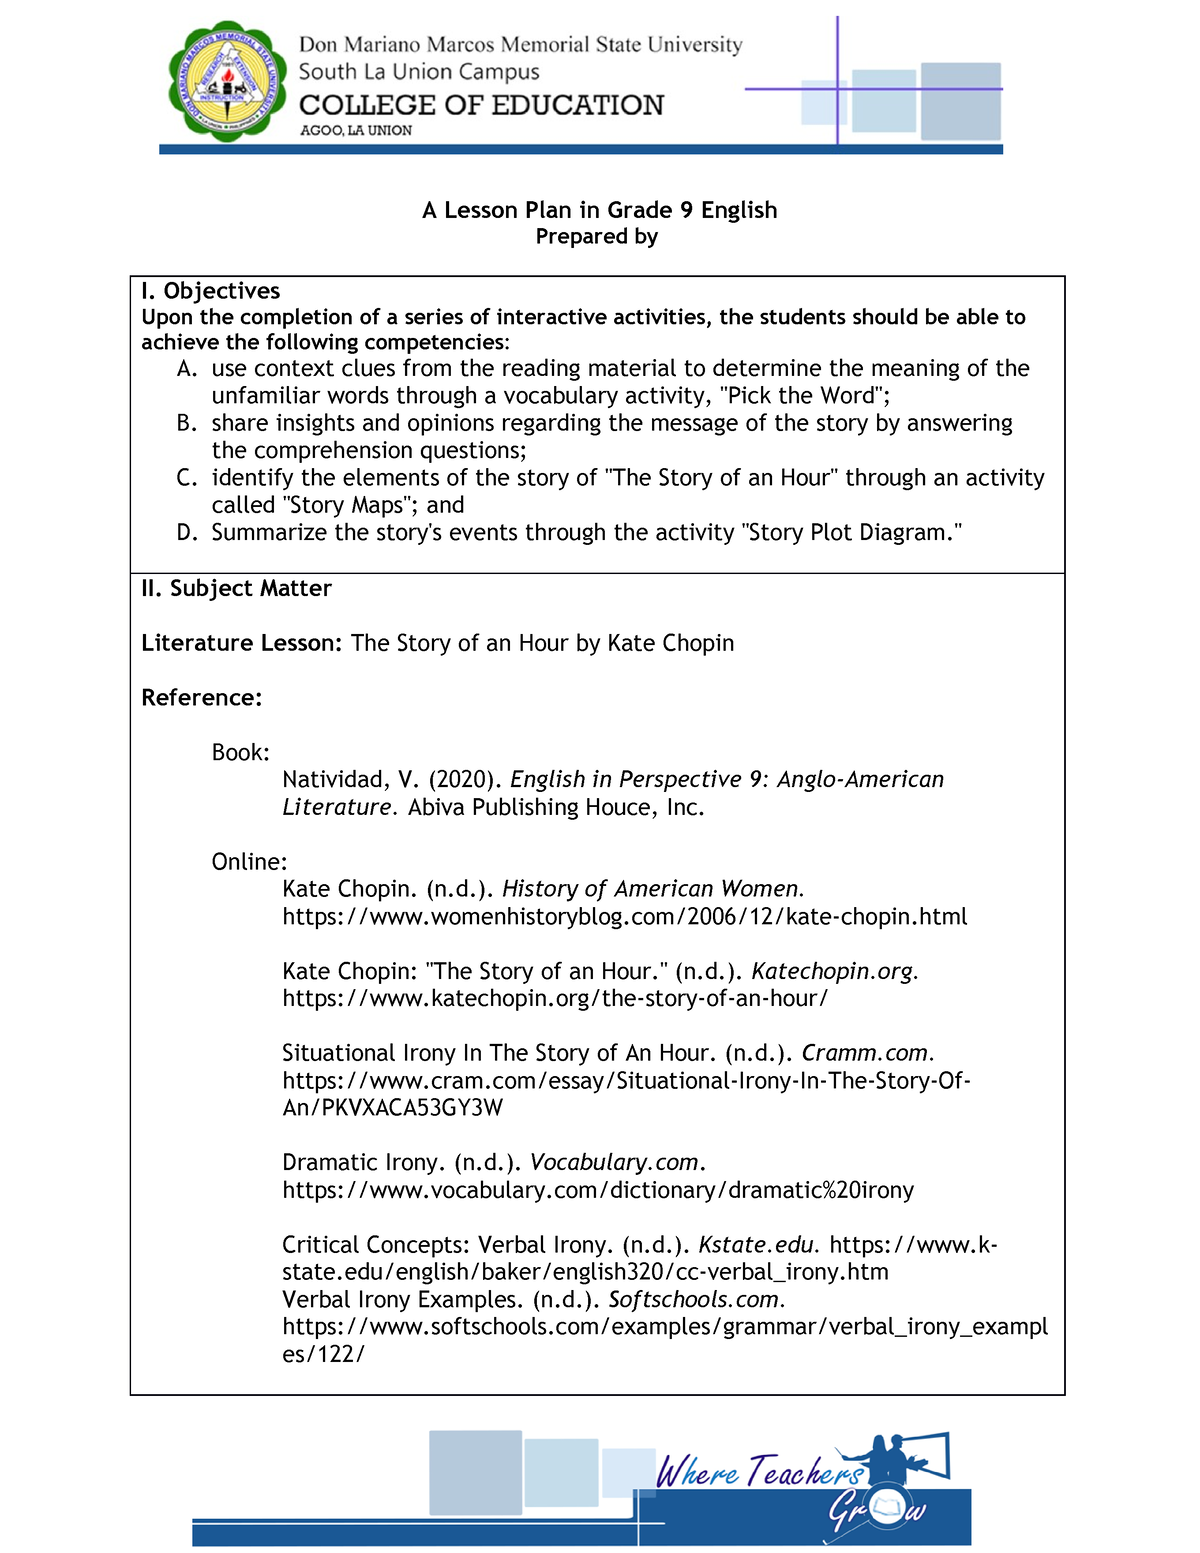 Final DEMO Lesson PLAN THE Story OF AN HOUR - A Lesson Plan in Grade 9 ...